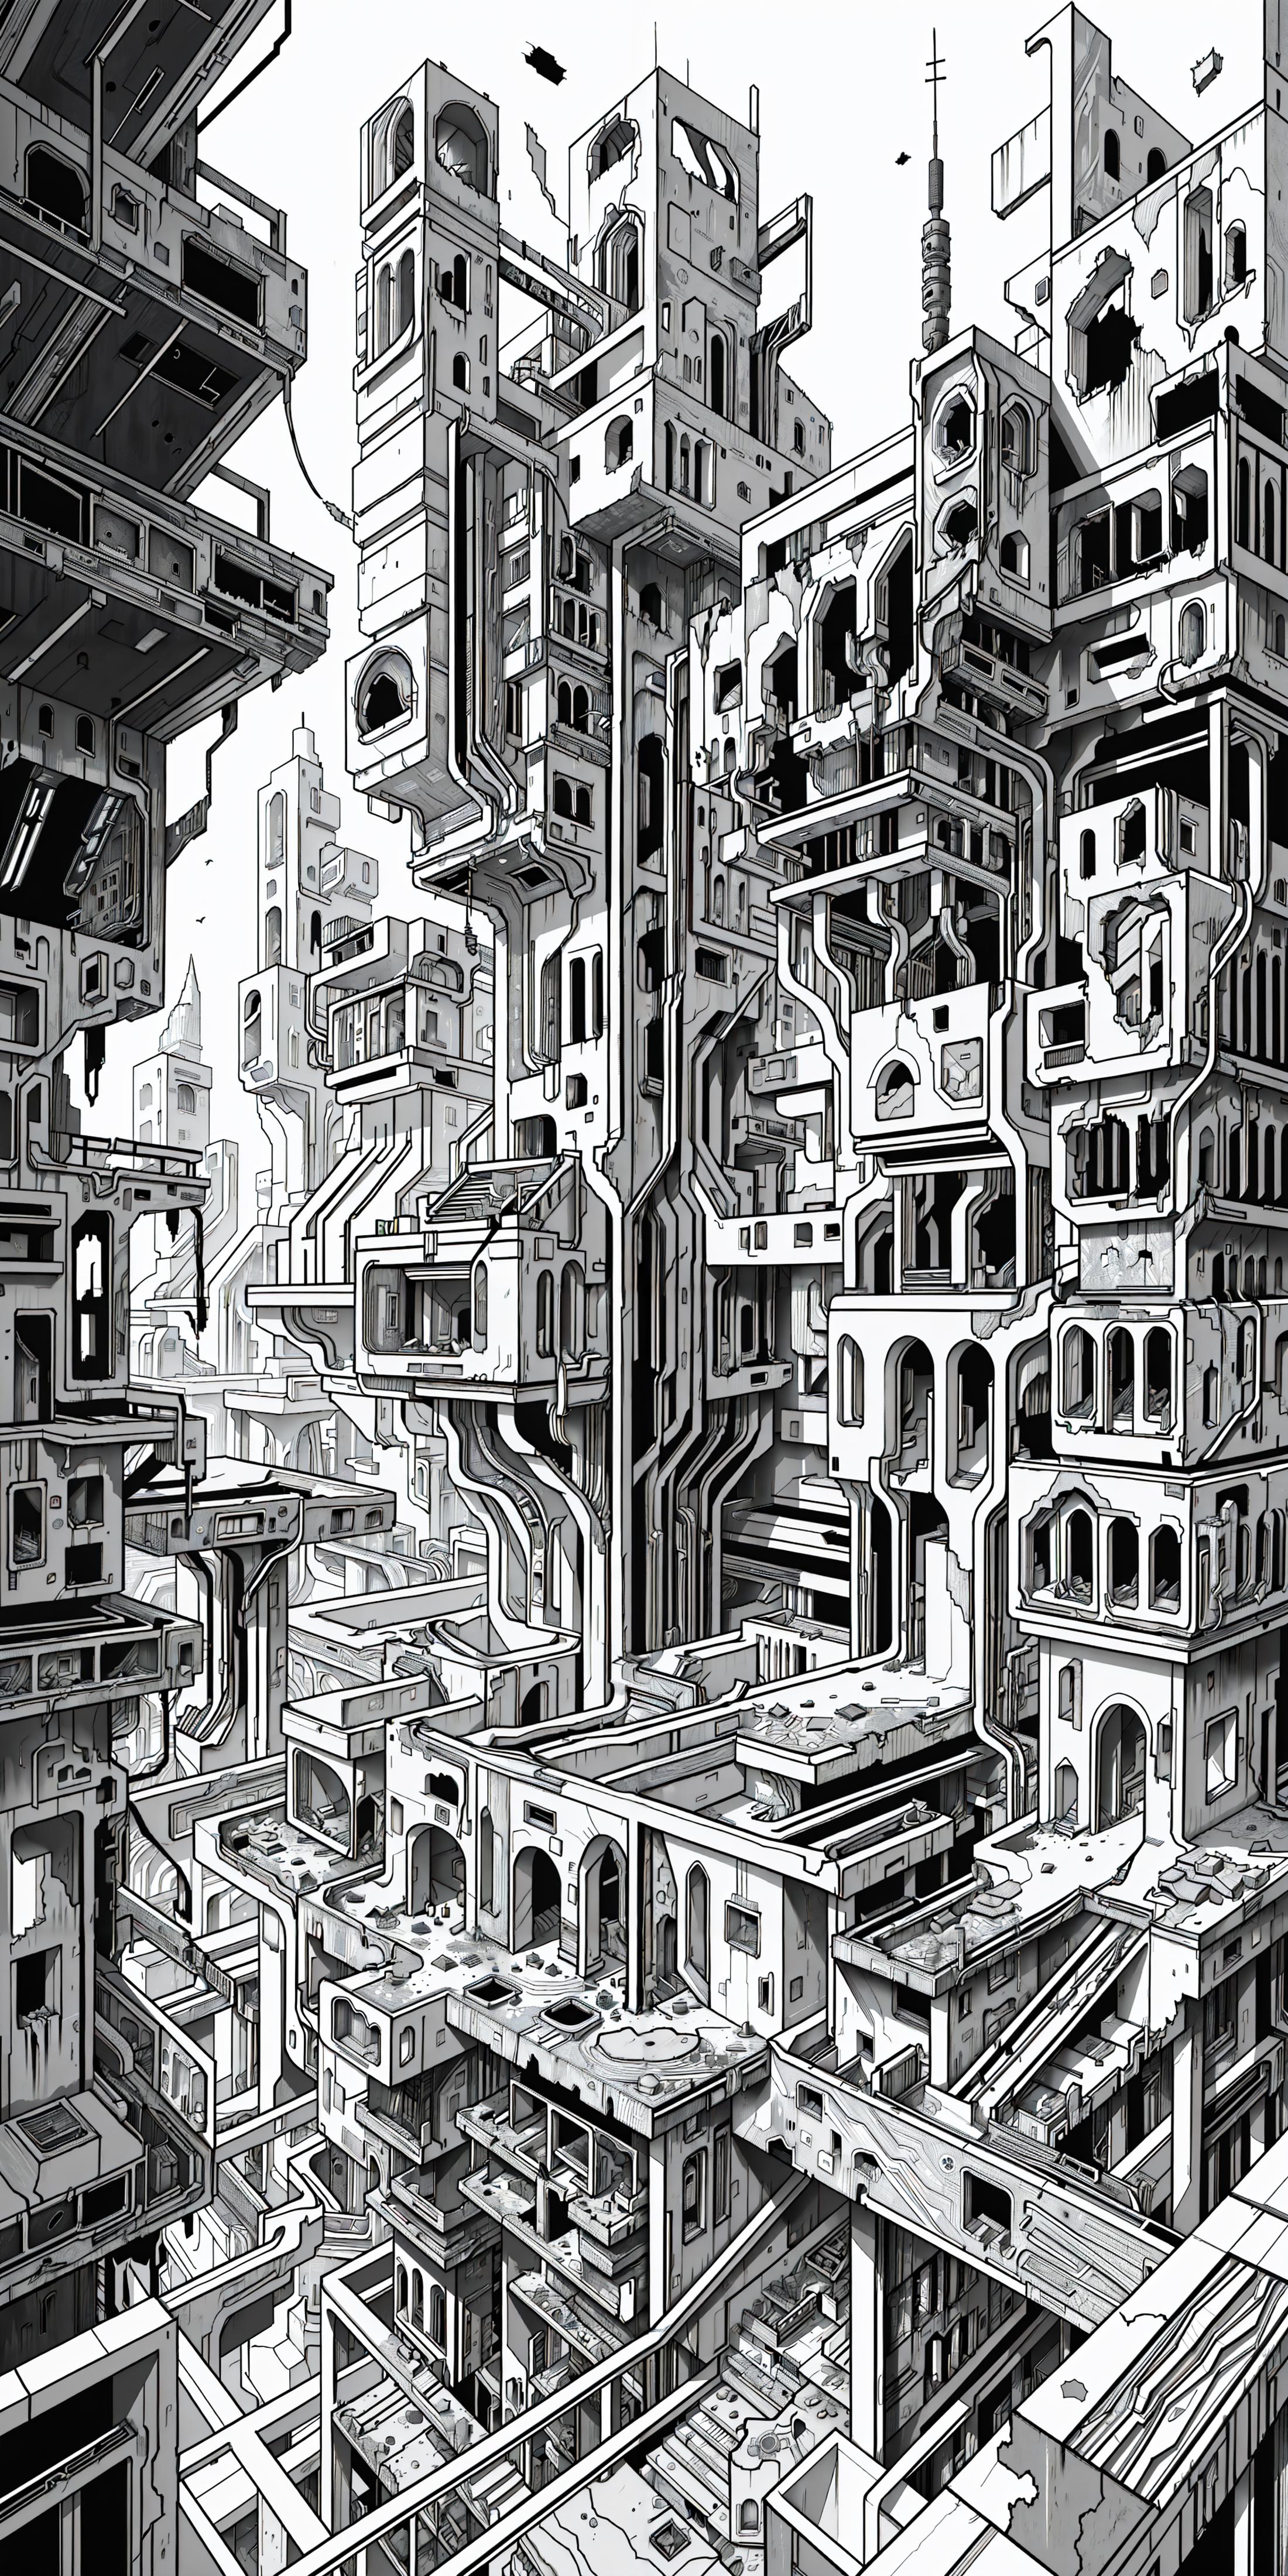 A black and white drawing of a large, futuristic city with tall buildings and a maze of interconnected structures.